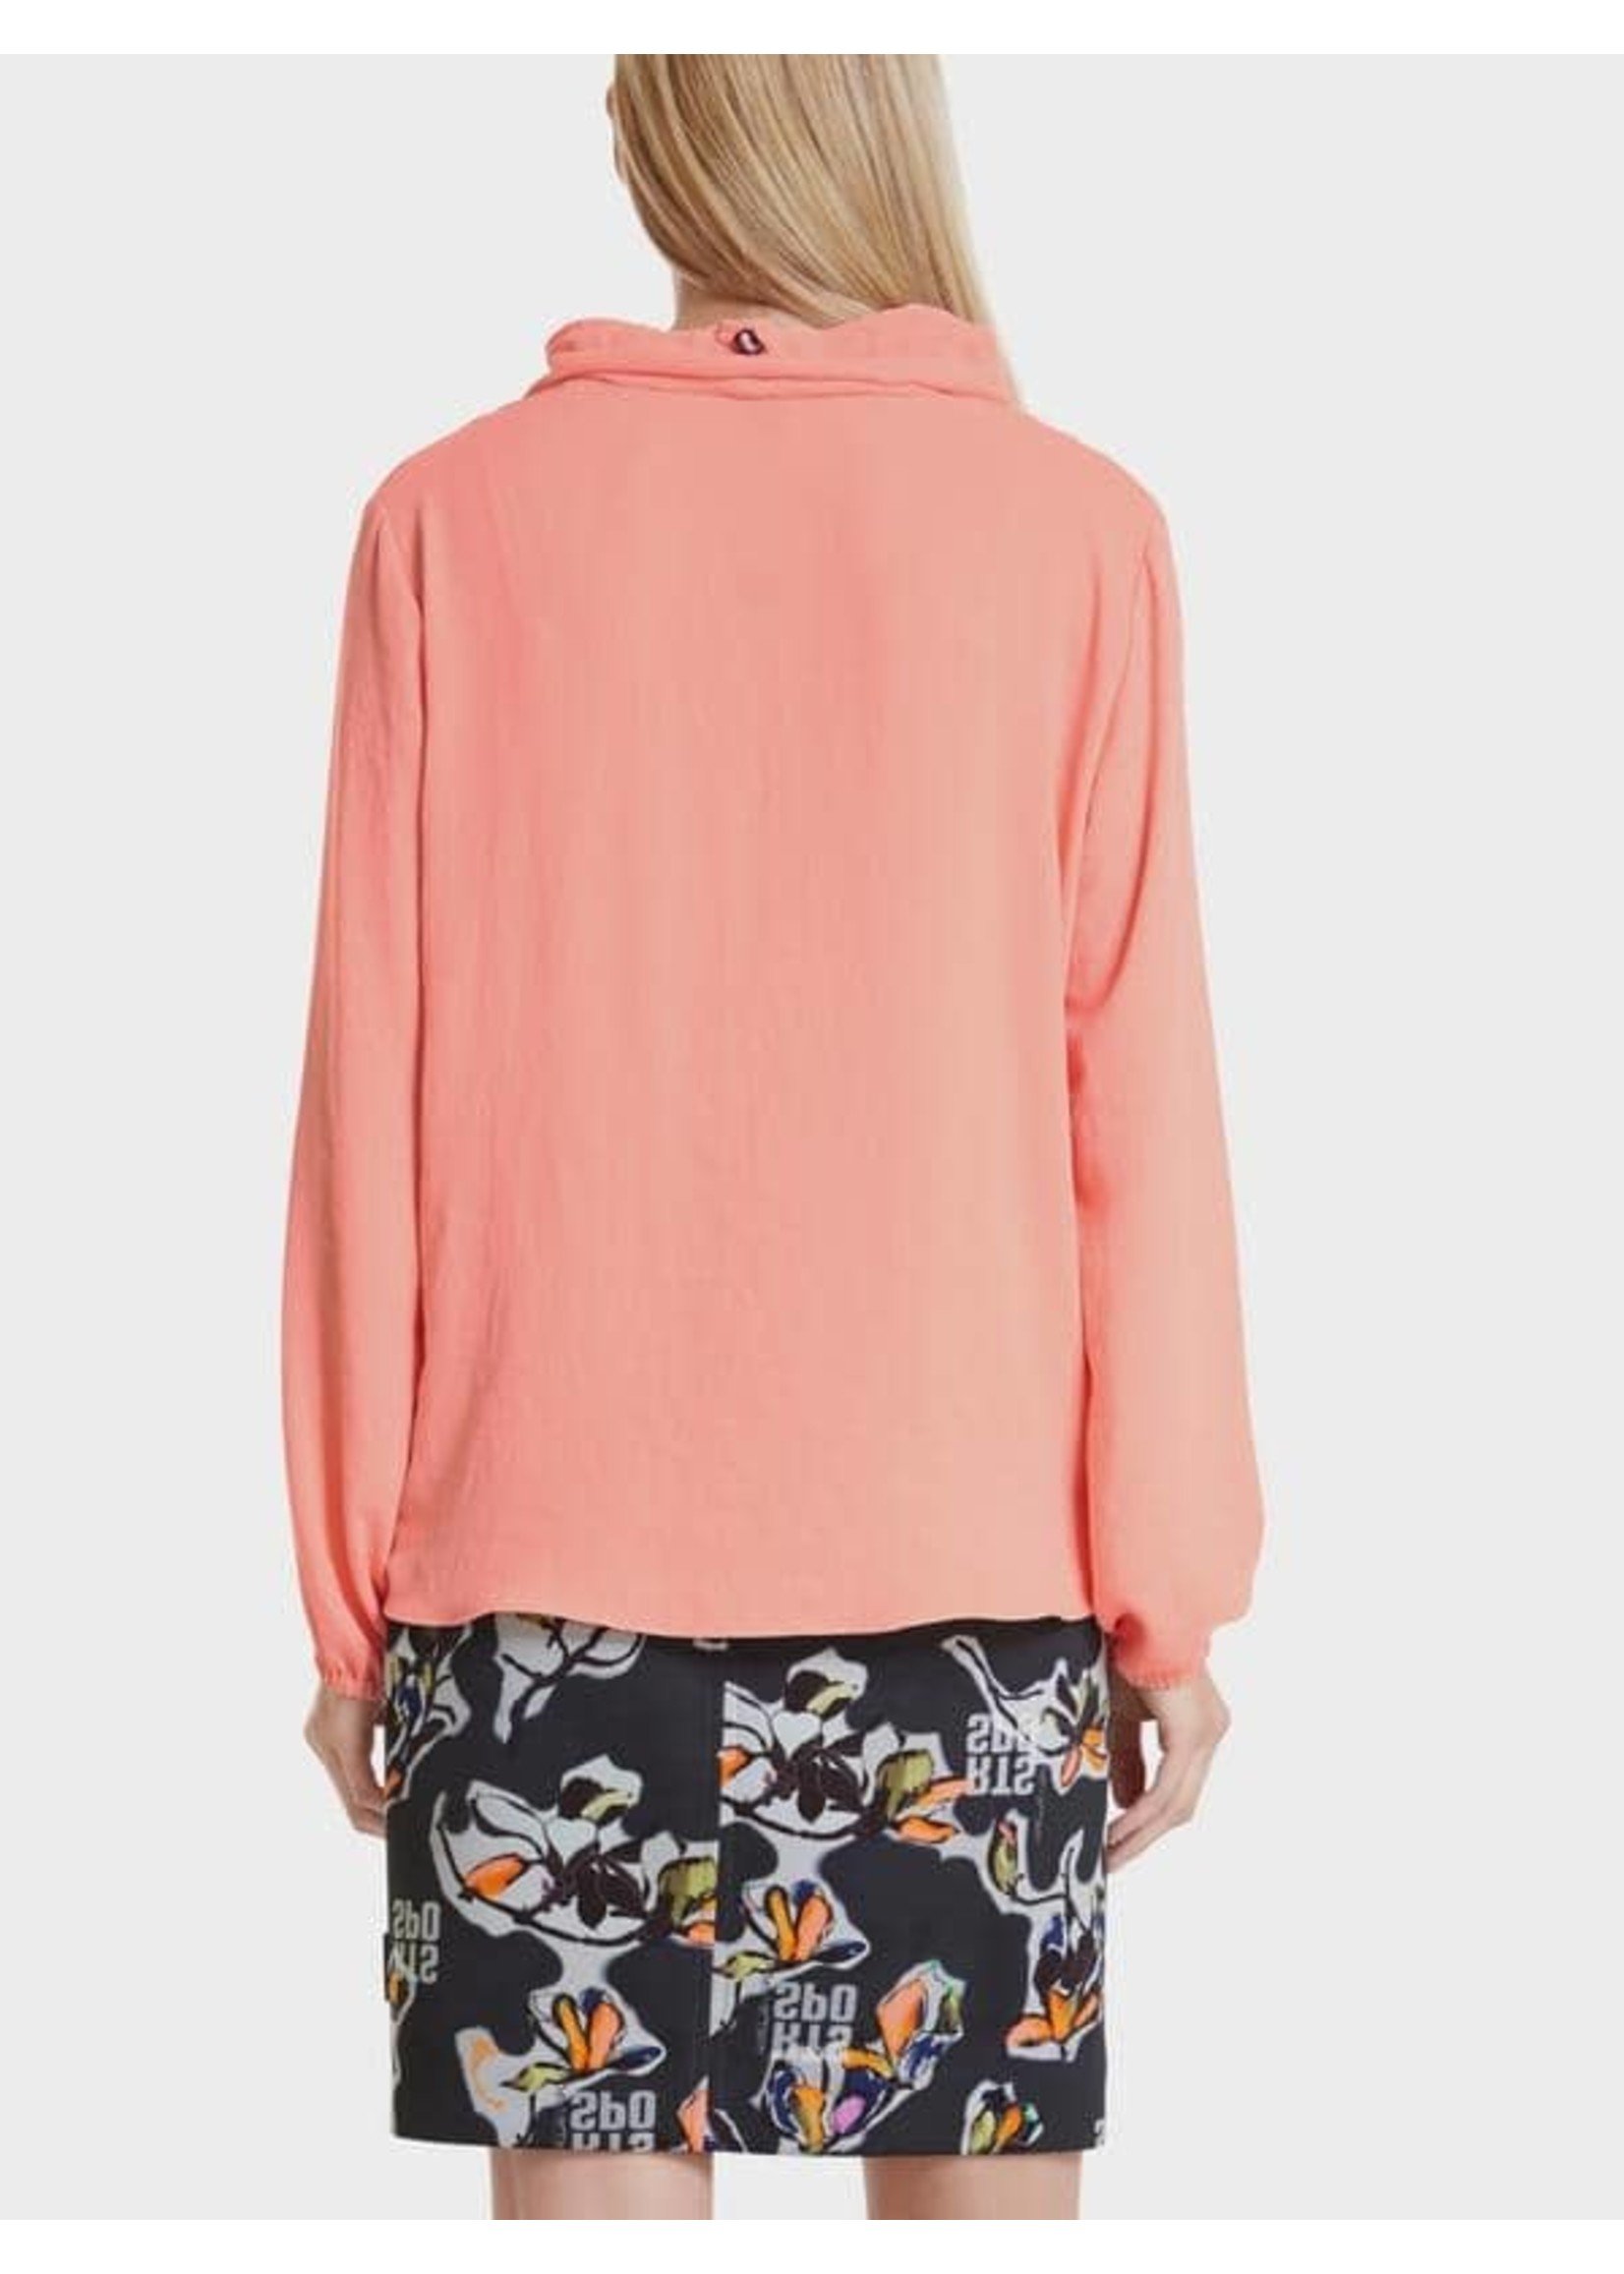 Marccain Sports Blouse SS 55.10 W41 463